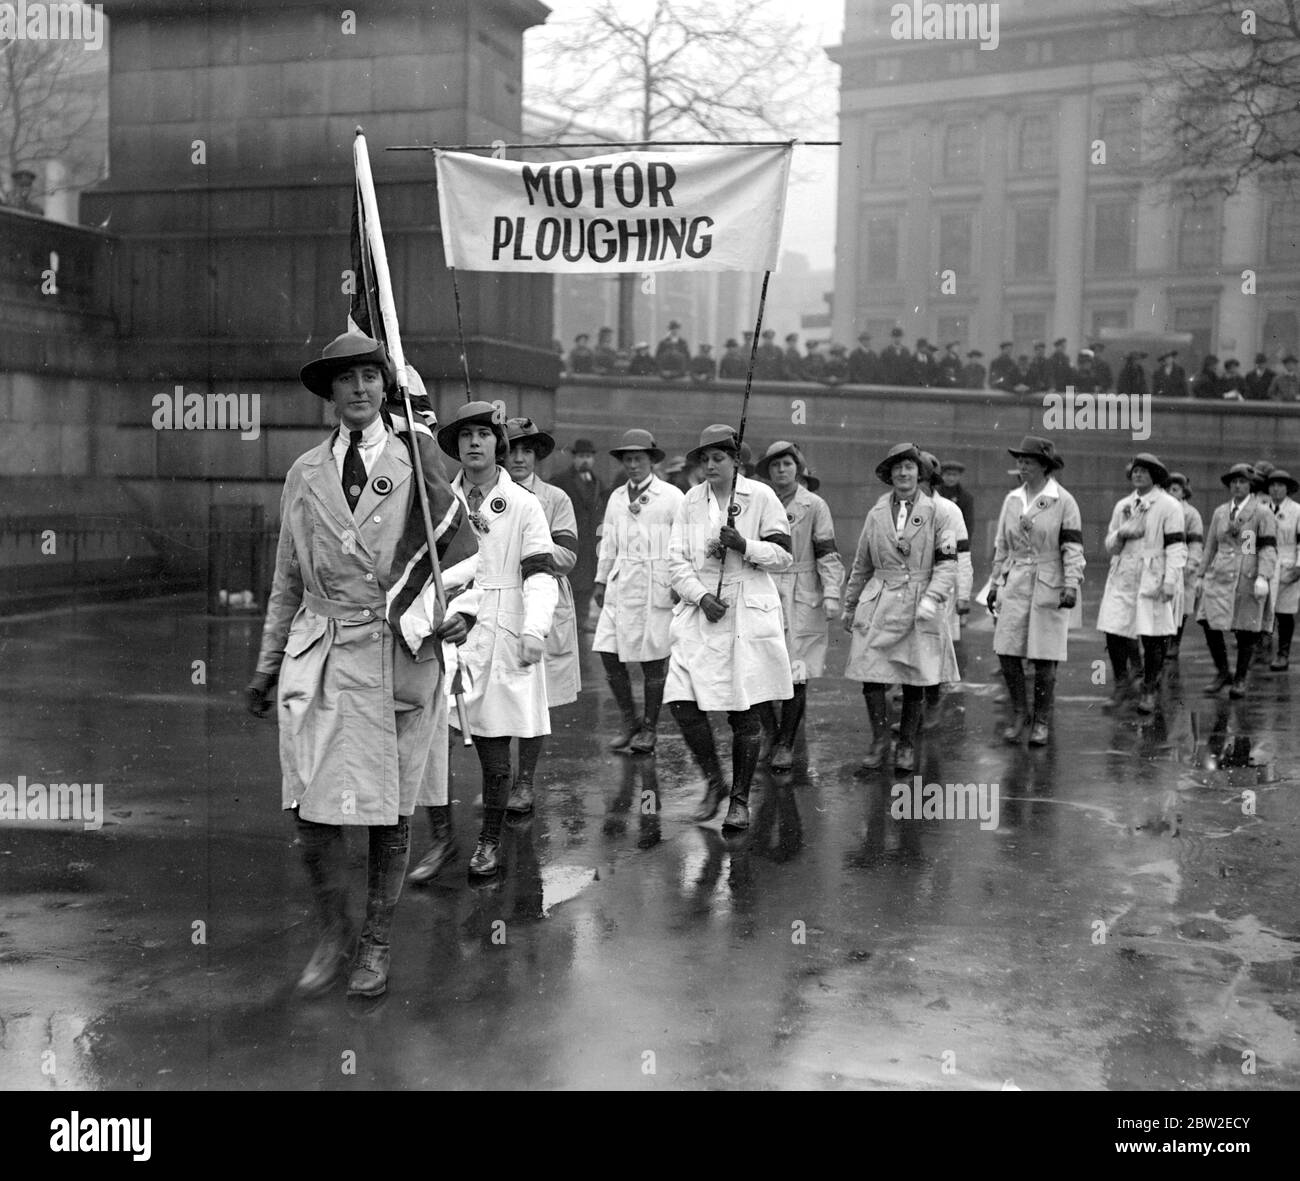 Recruiting for the Womens Land Army in Trafalgar Square. 19 March 1918 Stock Photo